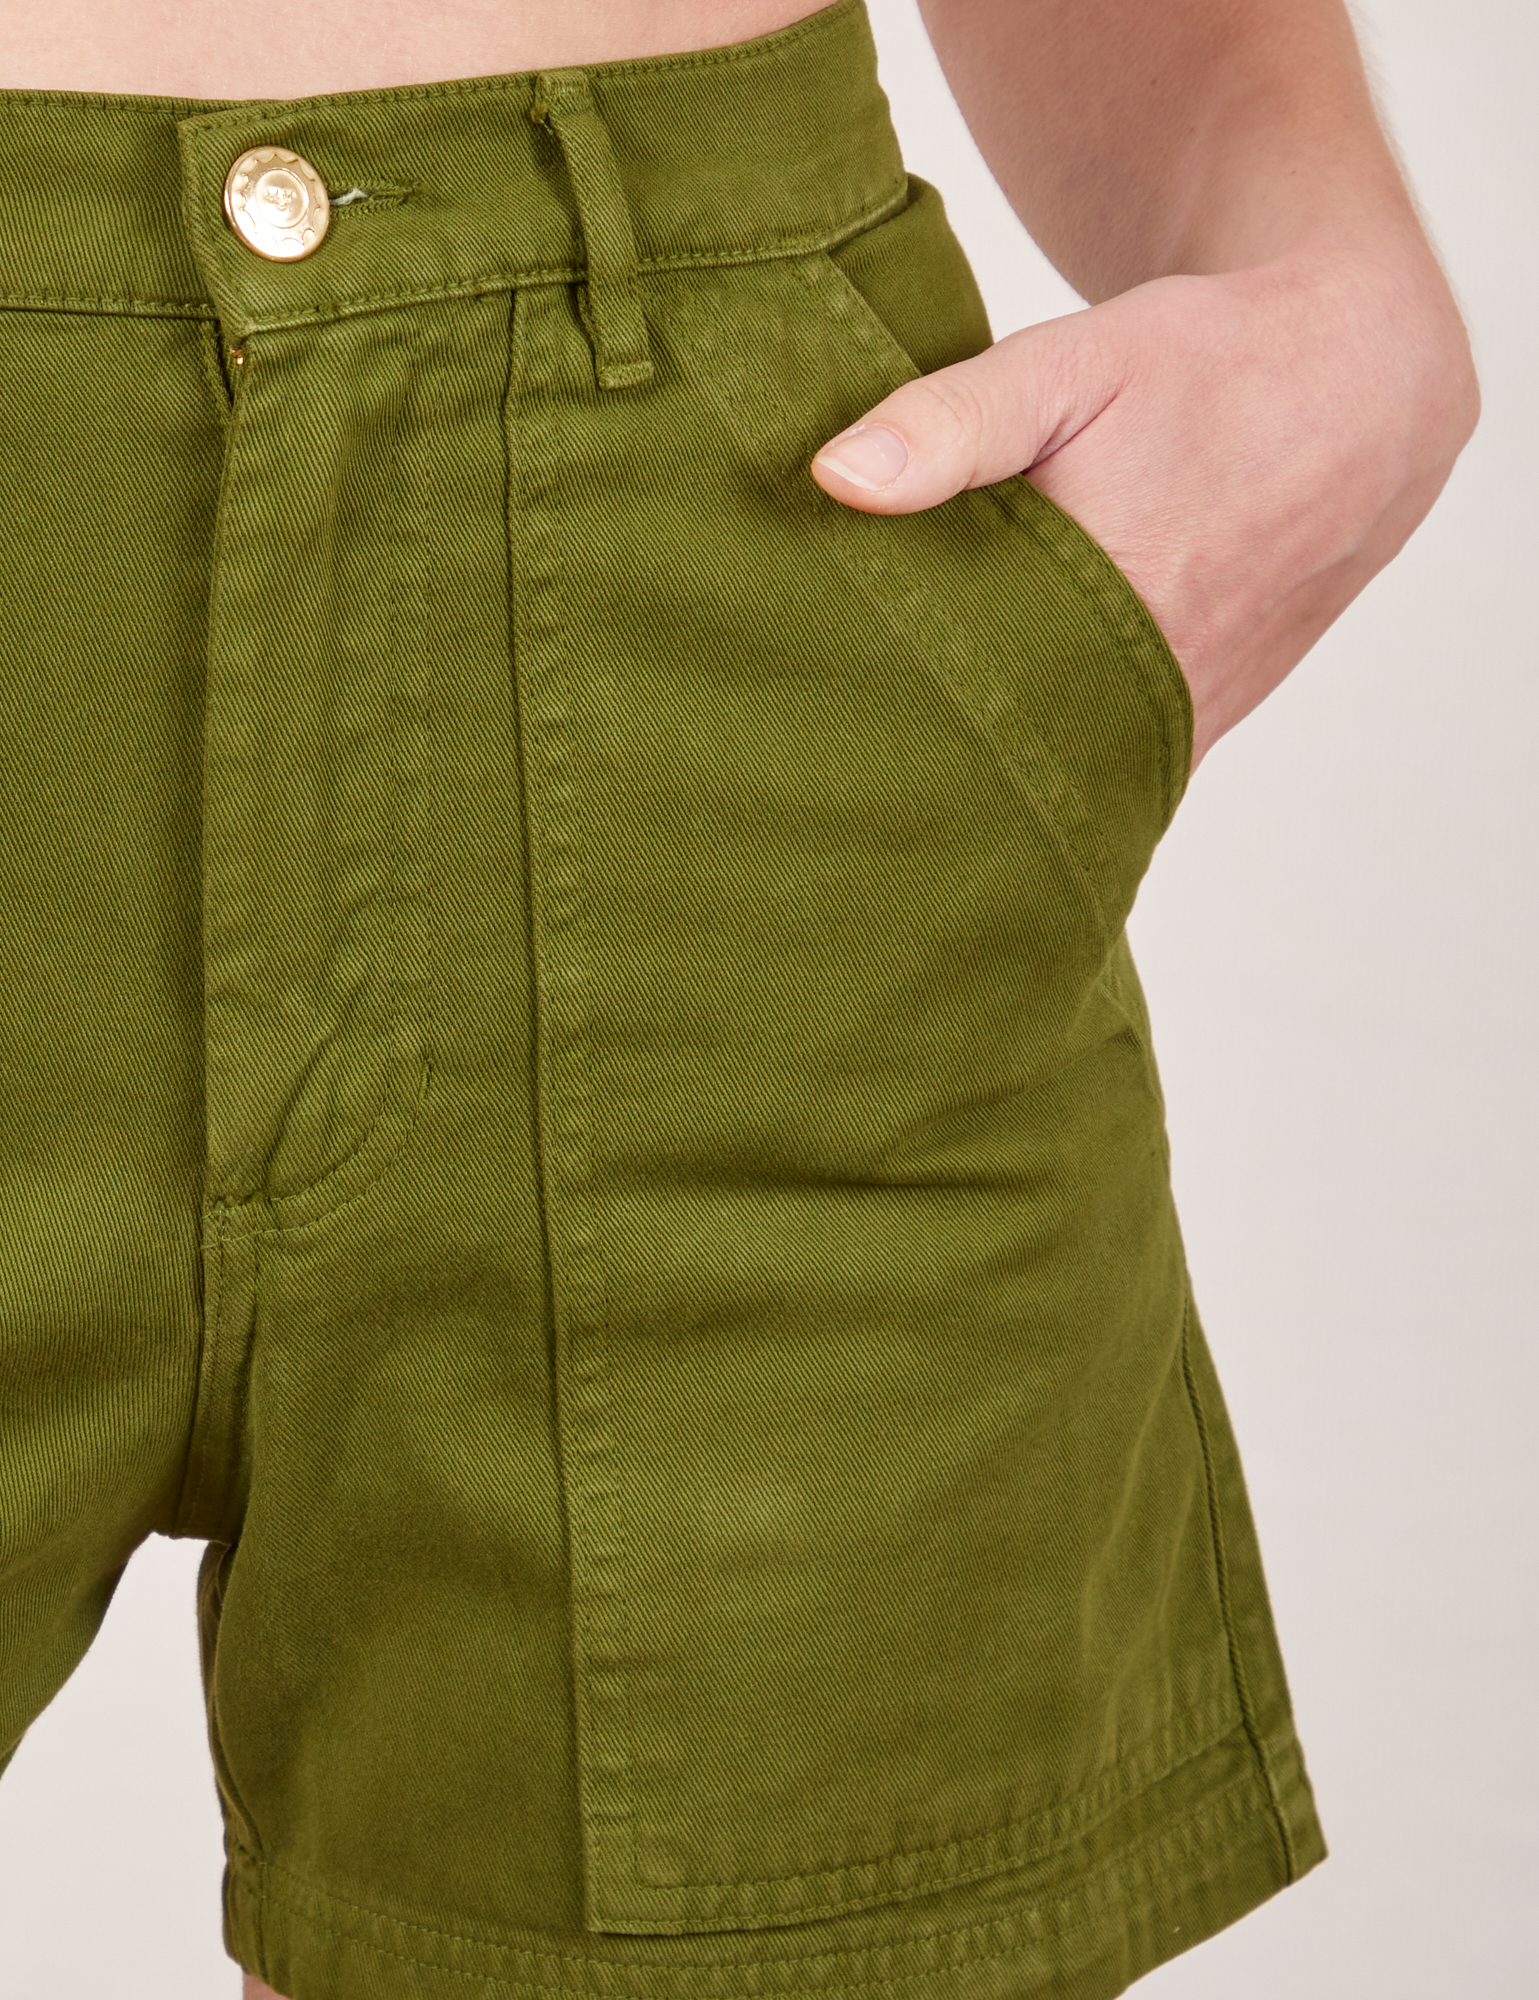 Classic Work Shorts in Summer Olive front pocket close up. Madeline has her hand in the pocket.